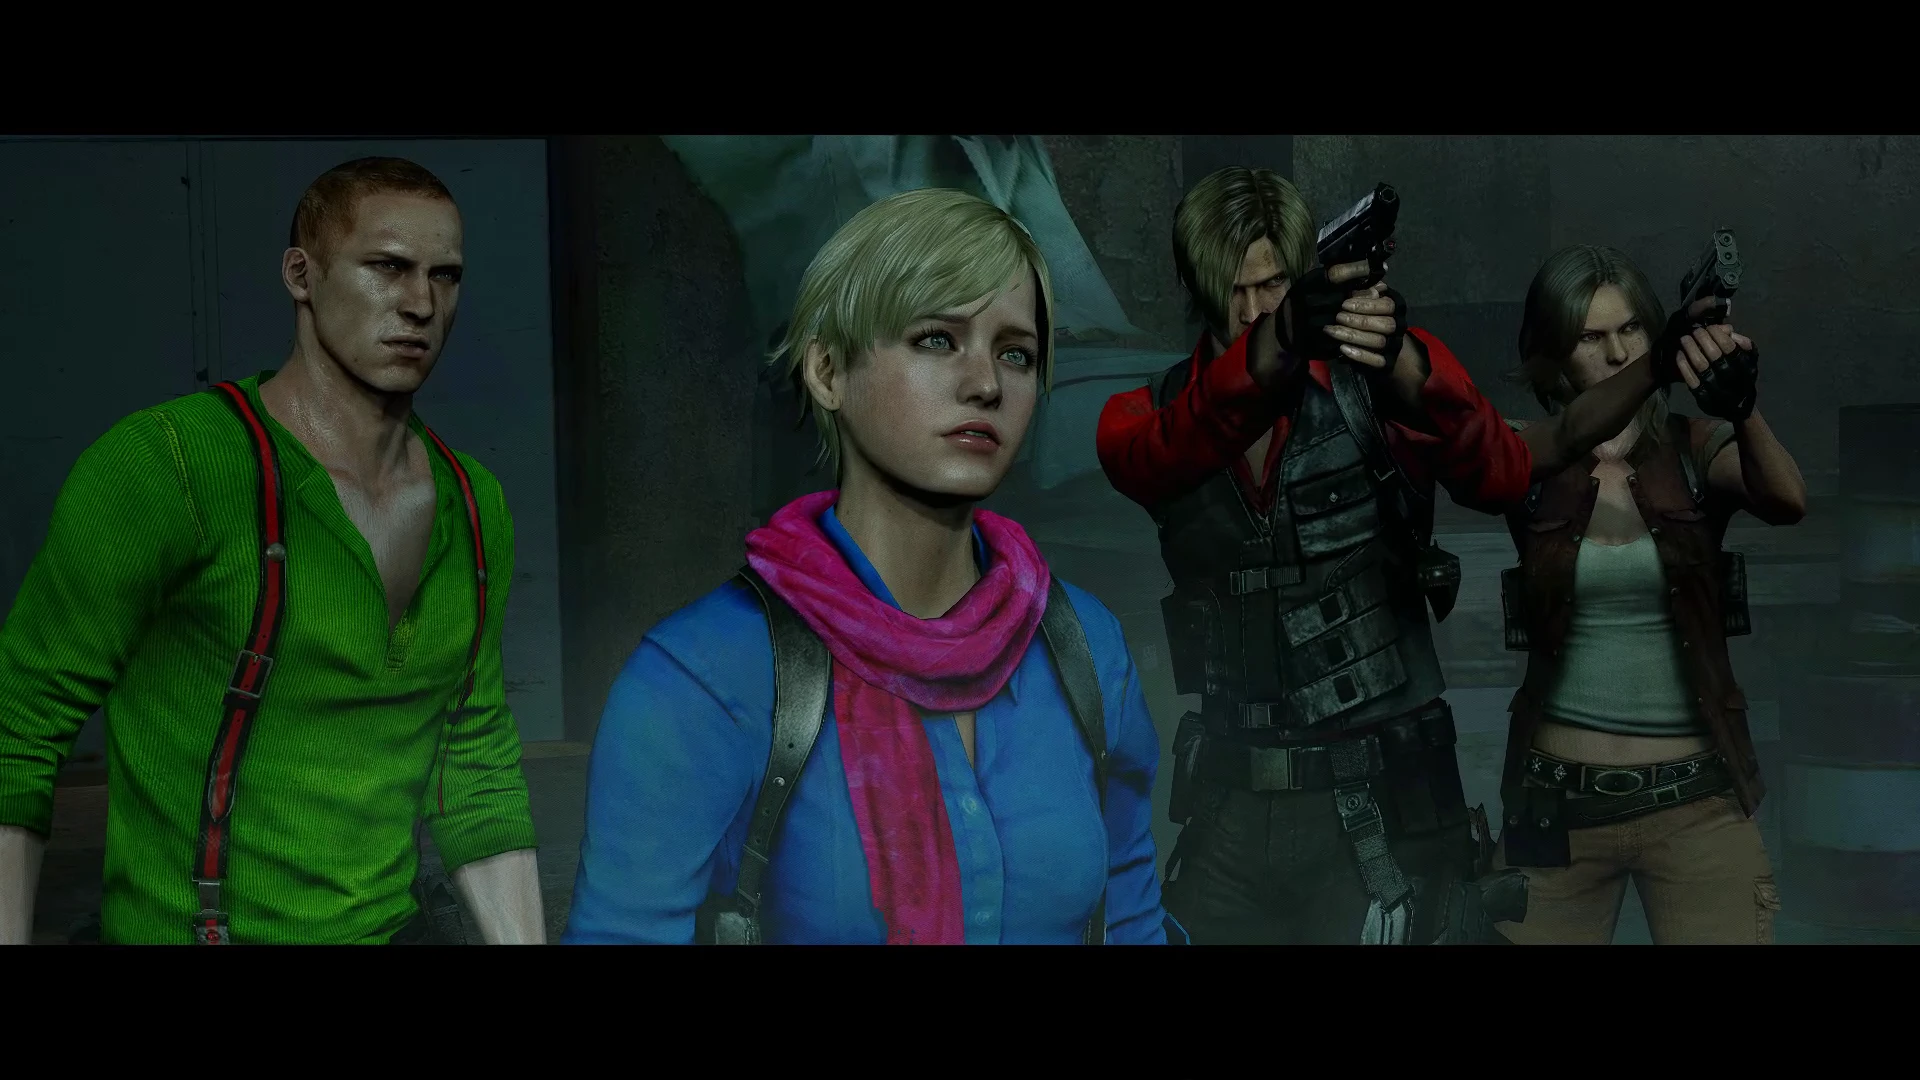 Resident evil 6 outfit mods.